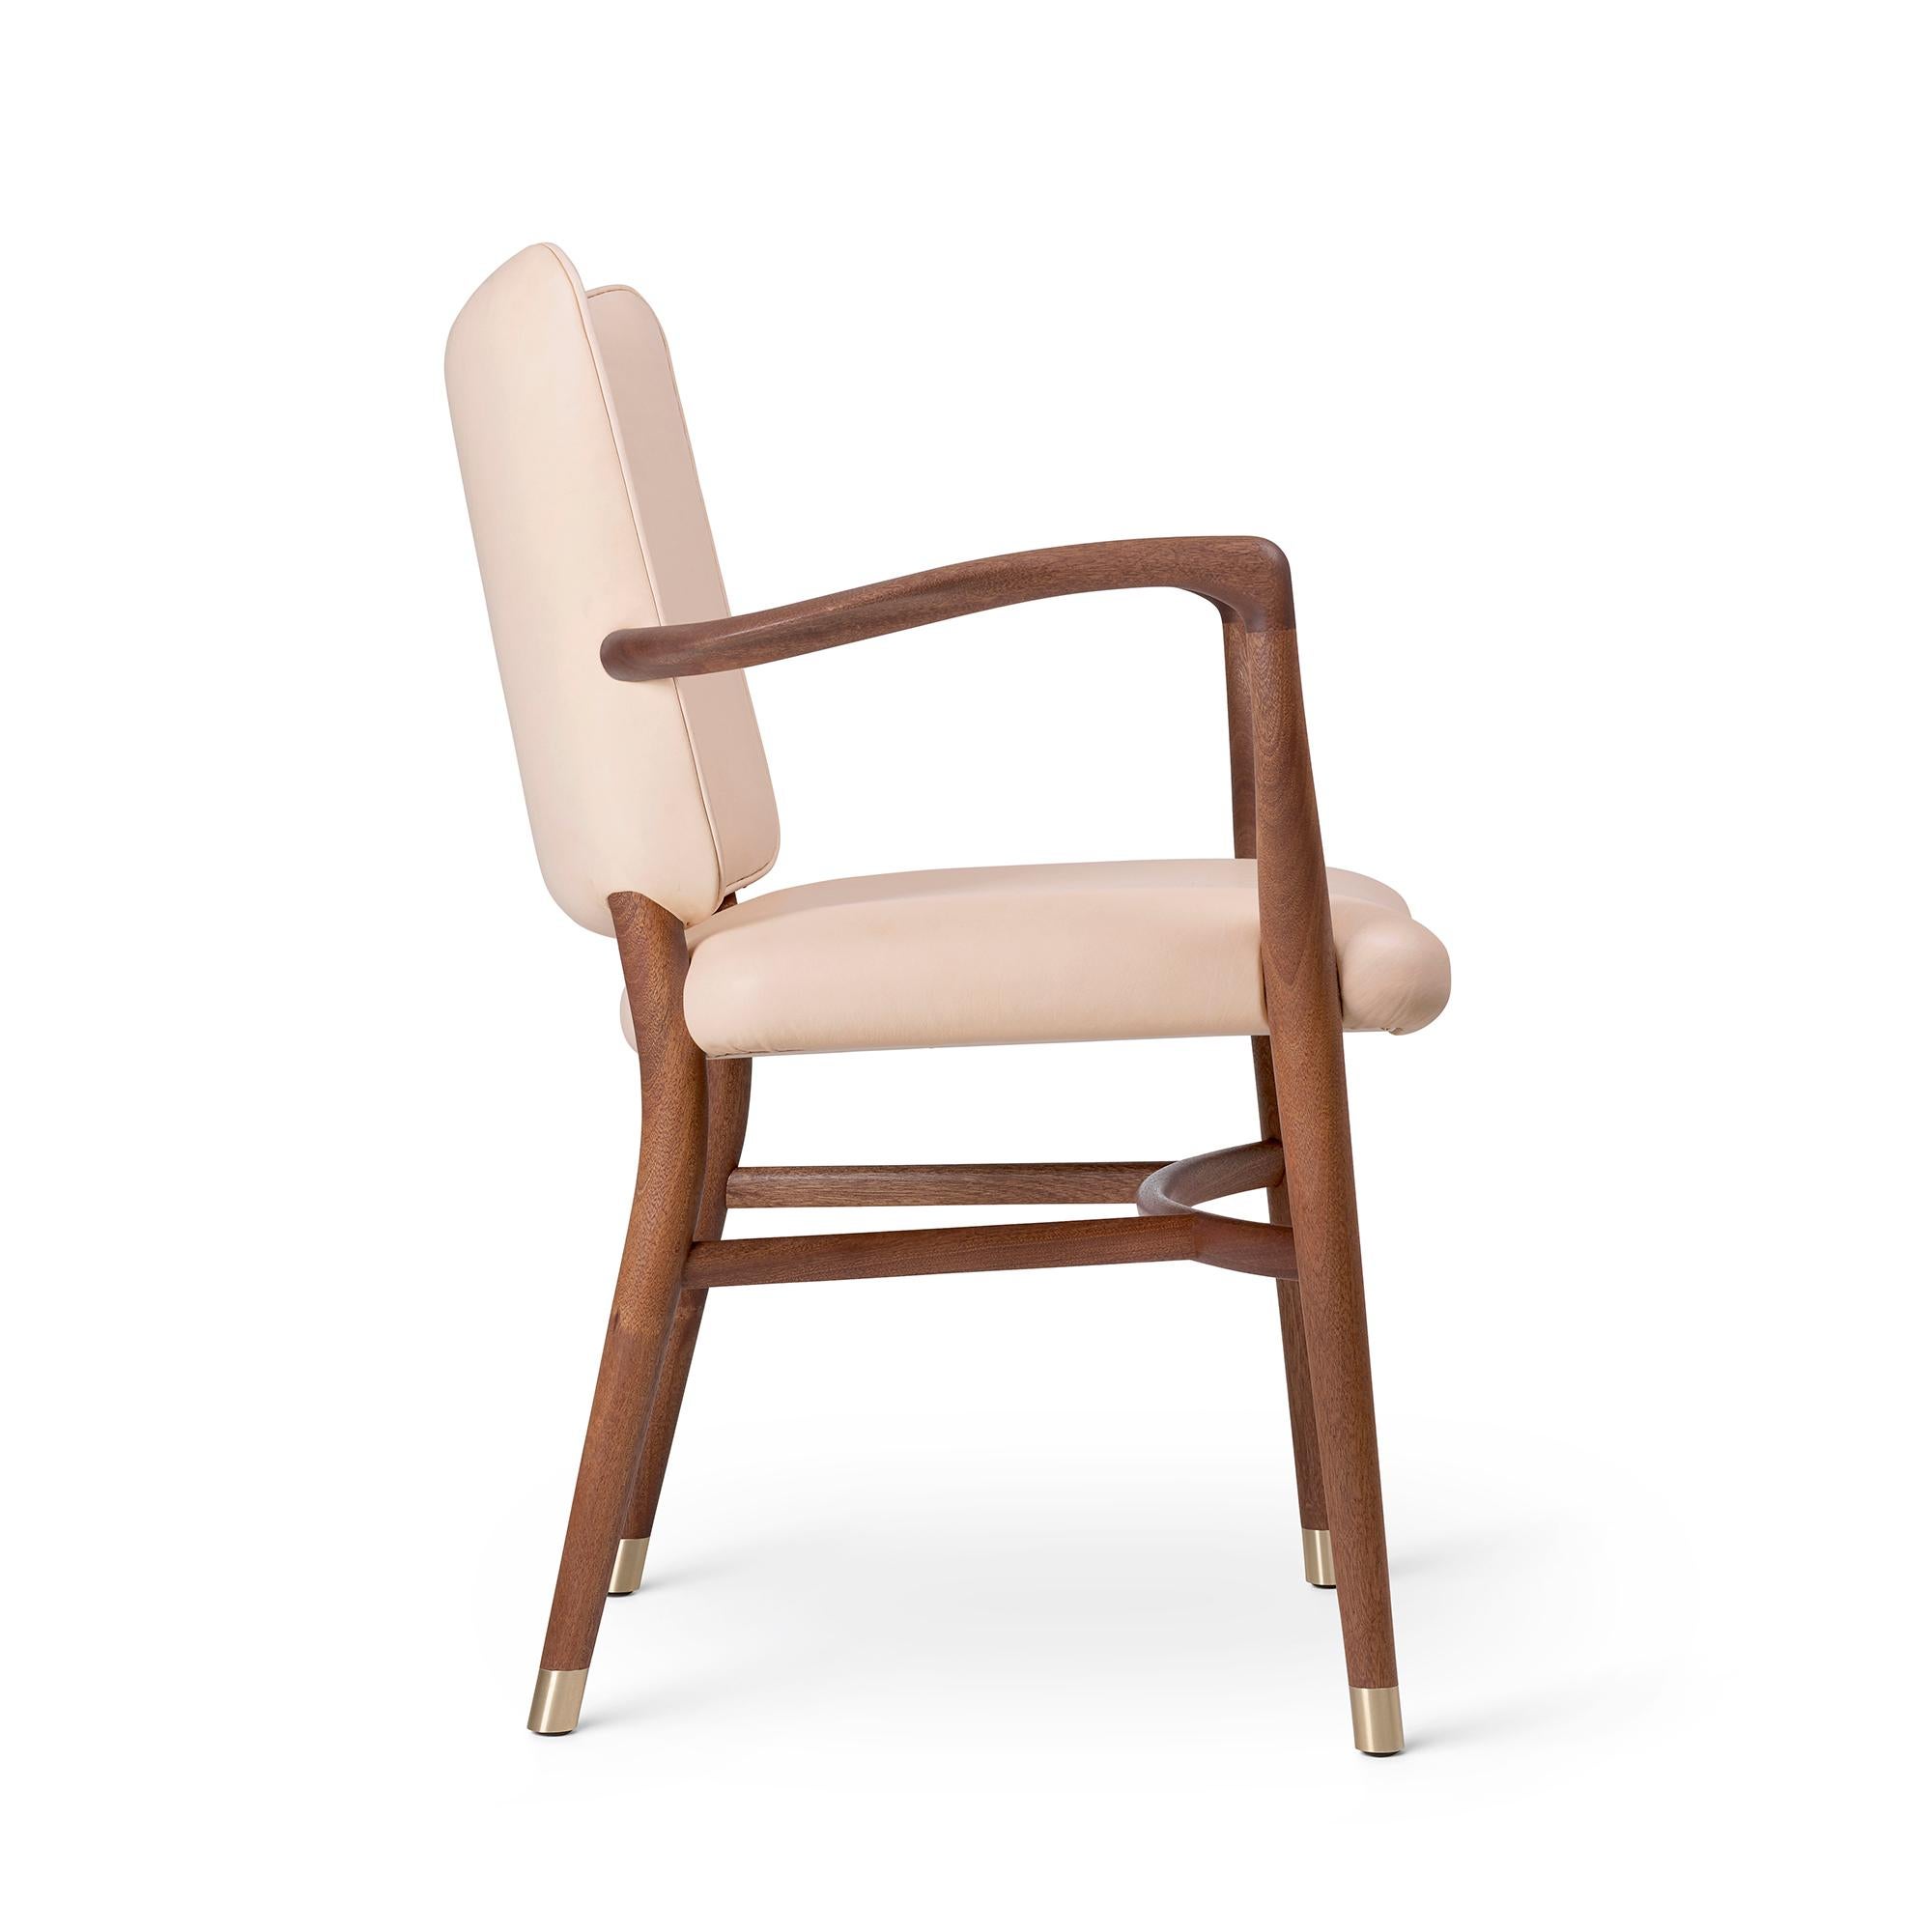 Vilhelm Lauritzen 'VLA61' Chair in Mahogany and Leather for Carl Hansen & Son In New Condition For Sale In Glendale, CA